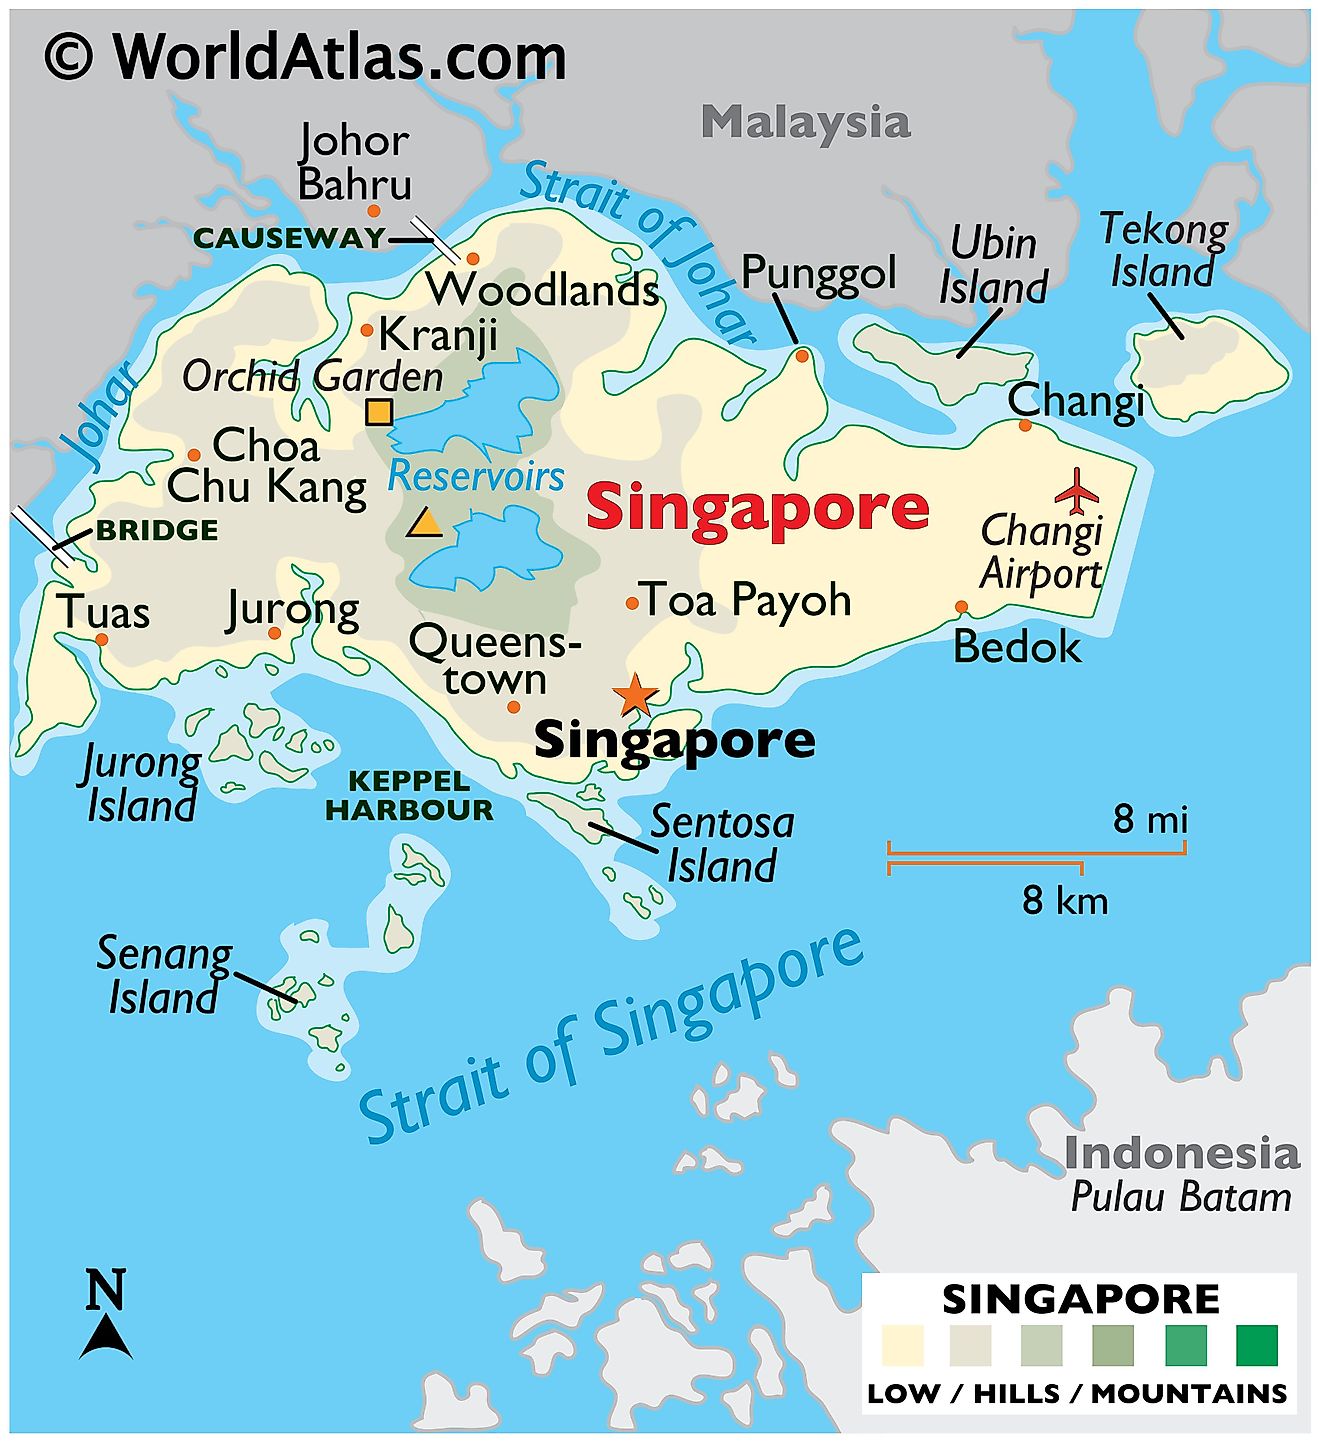 Physical Map of Singapore showing state boundaries, relief, major islands, important cities, and more.